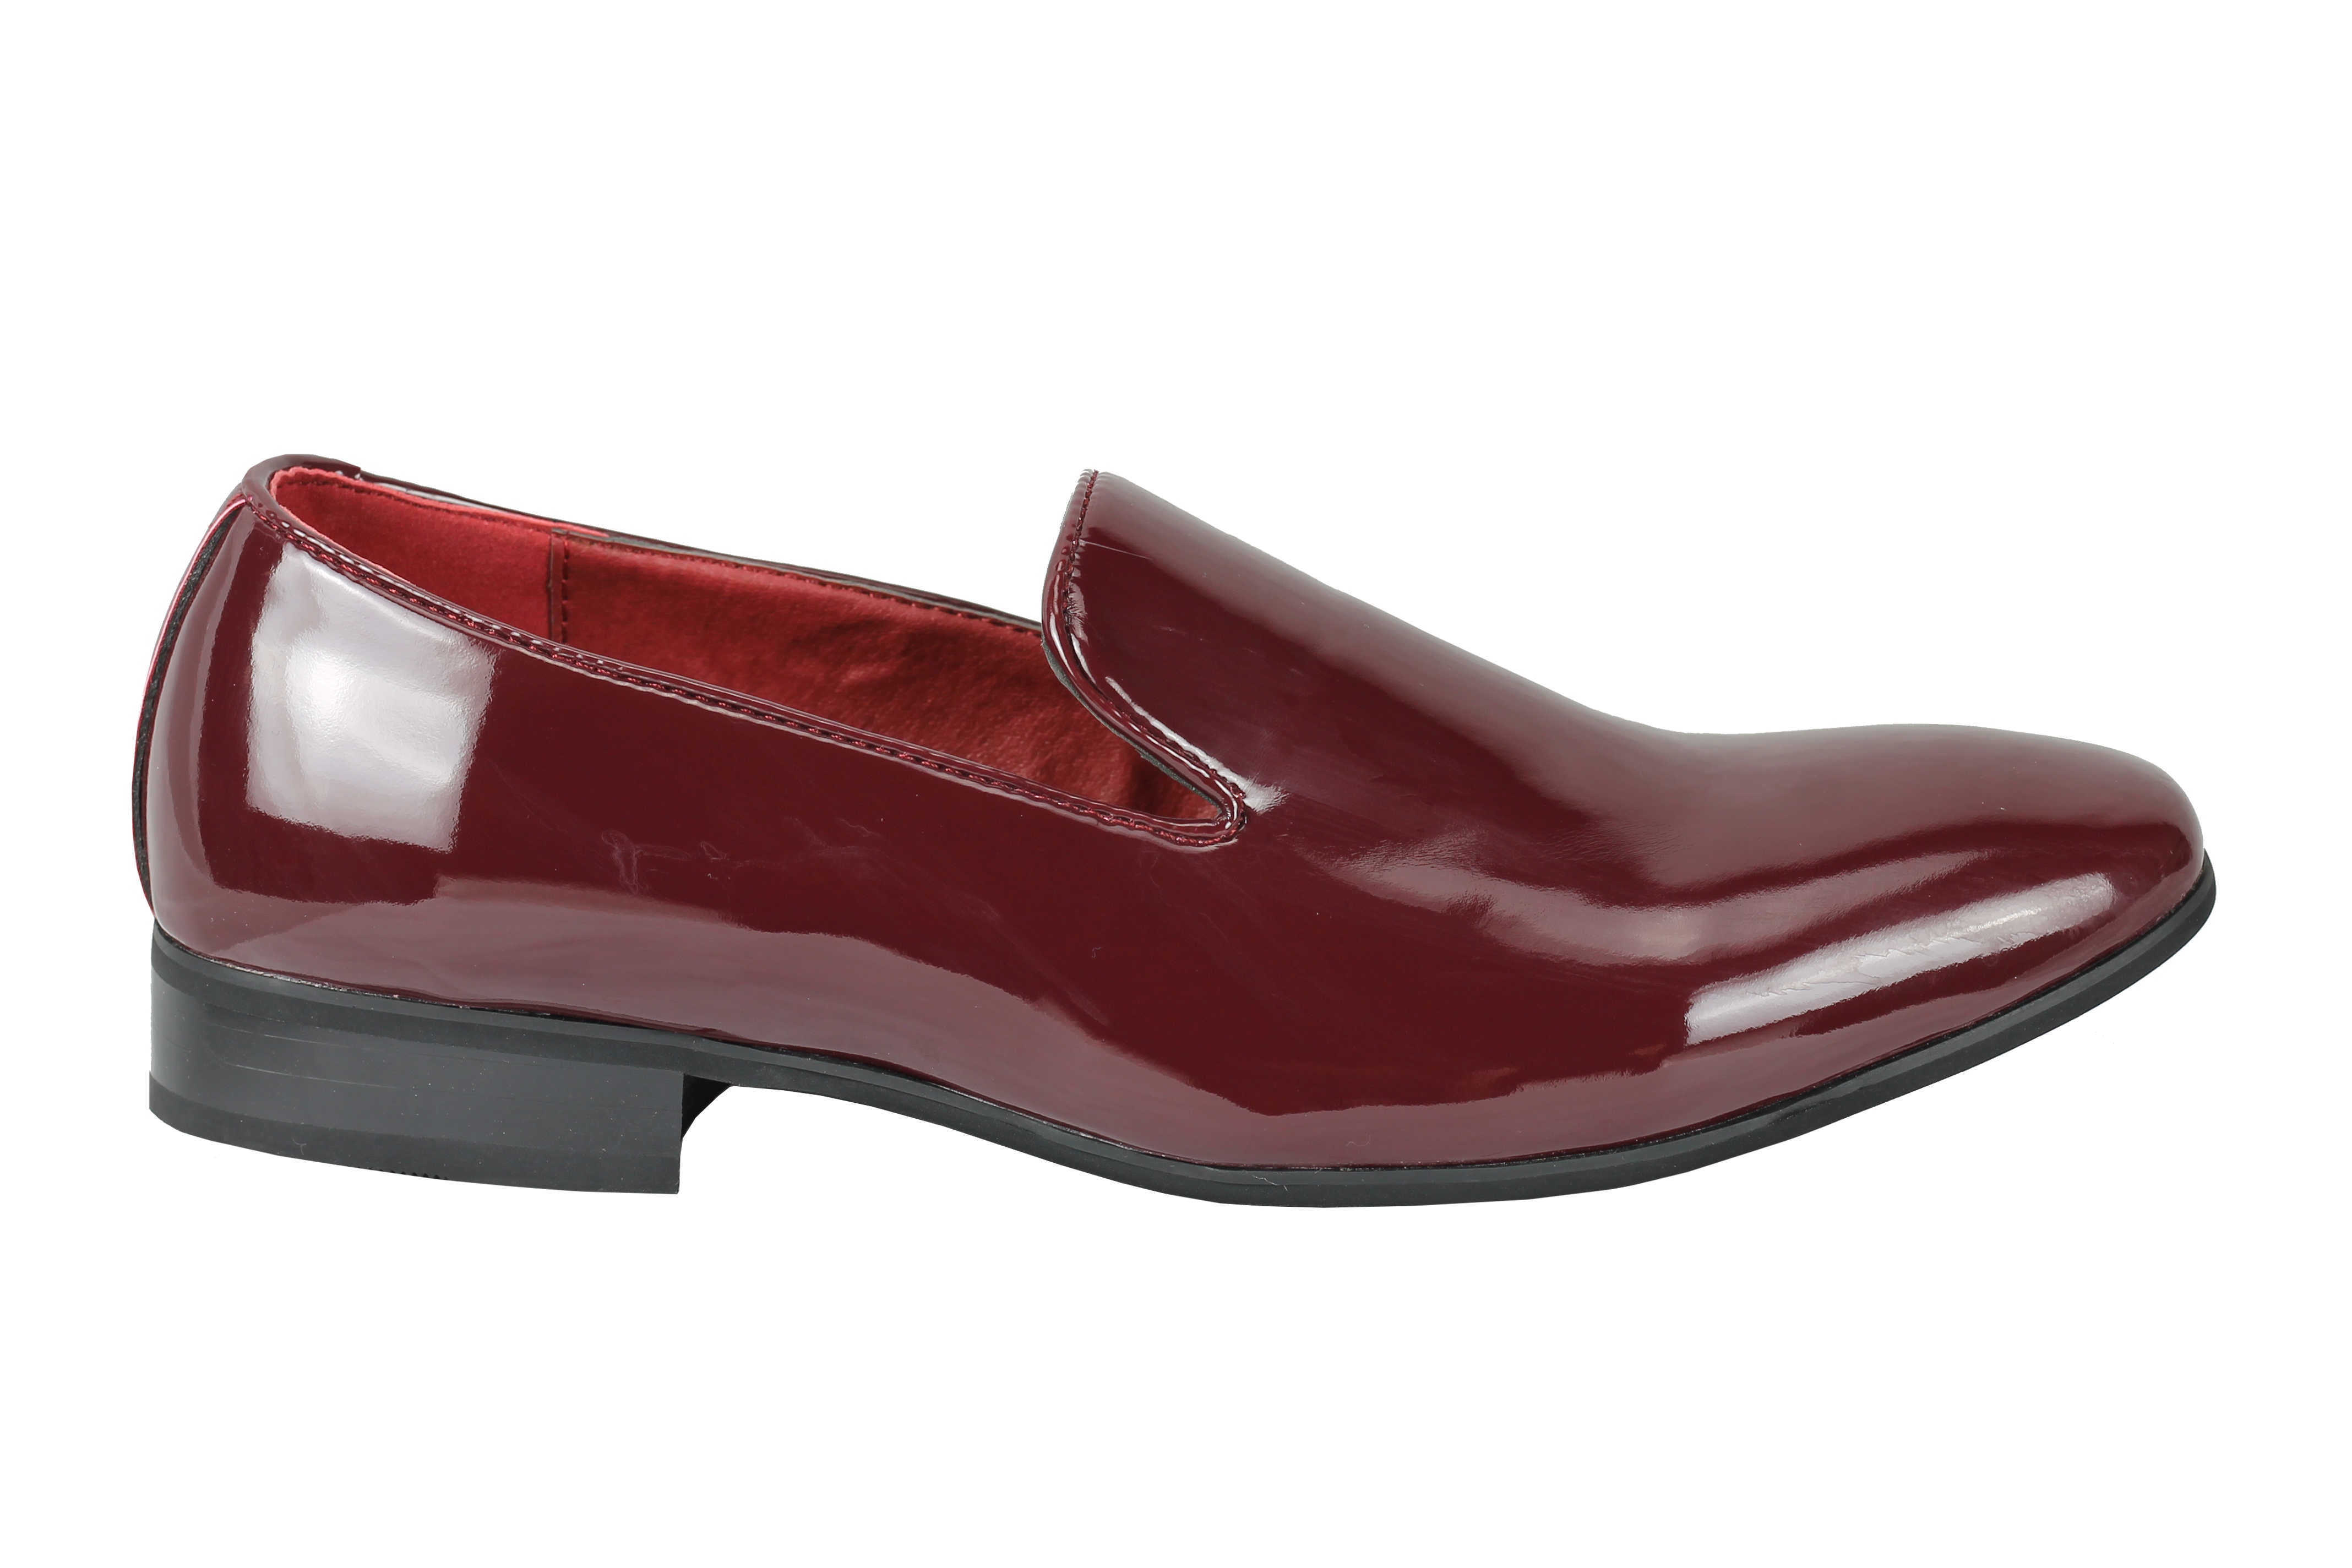 Faux Patent Leather Shiny Slip On Shoes In Maroon